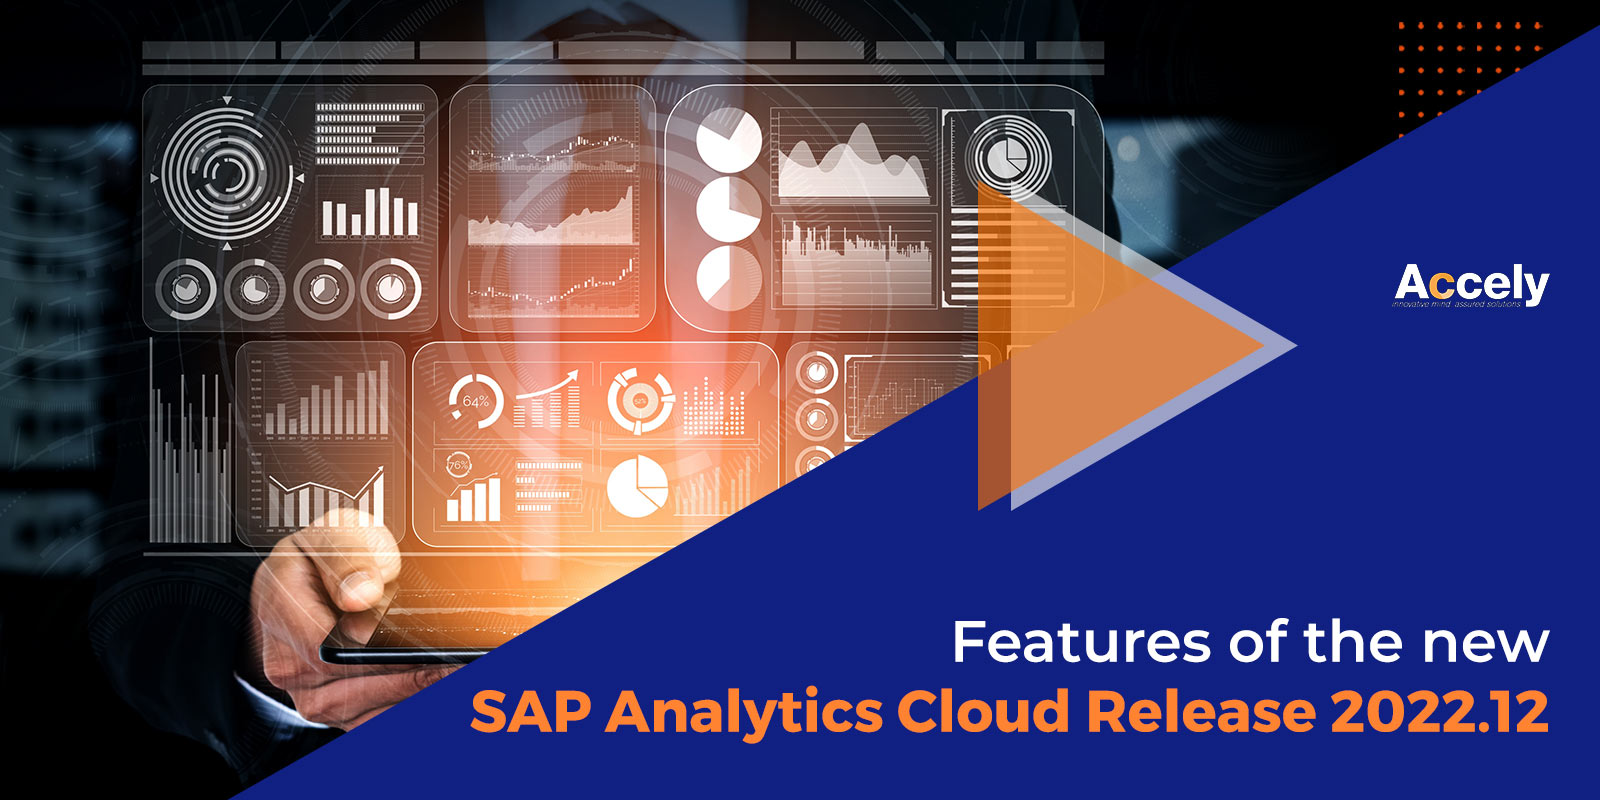 Features of the New SAP Analytics Cloud Release 2022.12